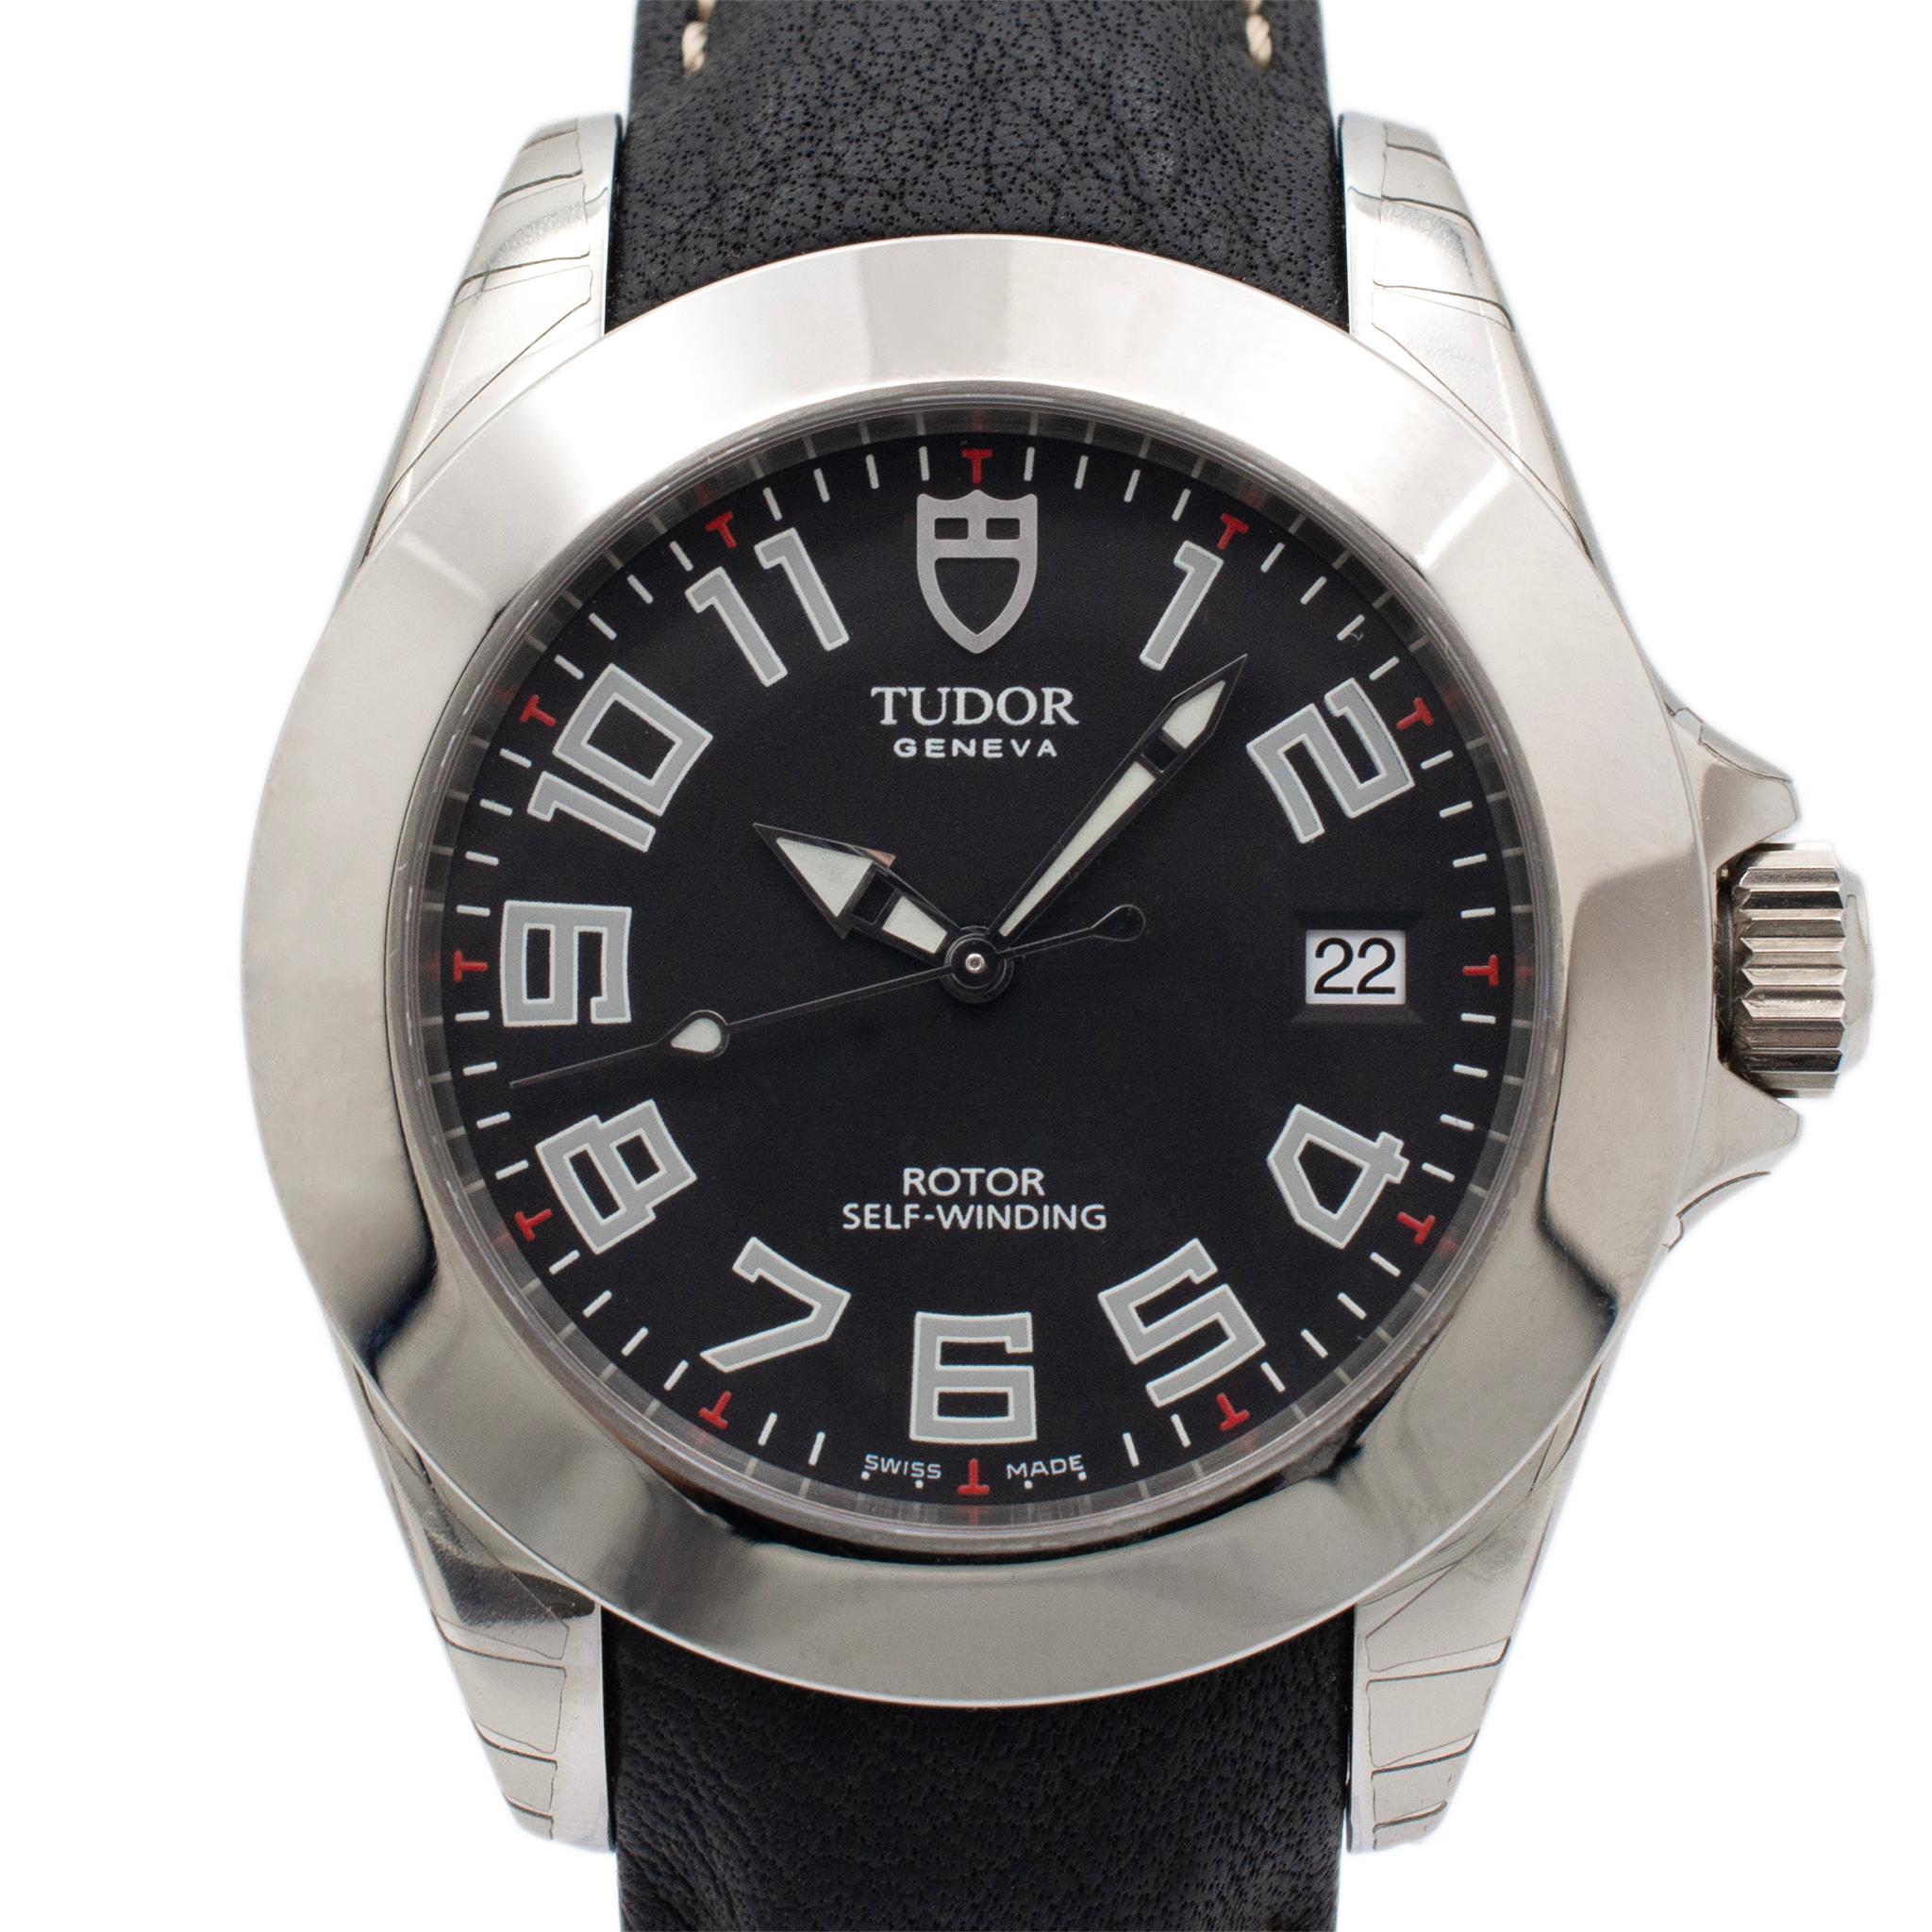 Brand: Tudor

Gender: Men's

Metal Type: Stainless Steel

Diameter: 39.00 mm

Weight: 86.52 grams

Gents stainless steel TUDOR Swiss made watch with original box and papers. The 